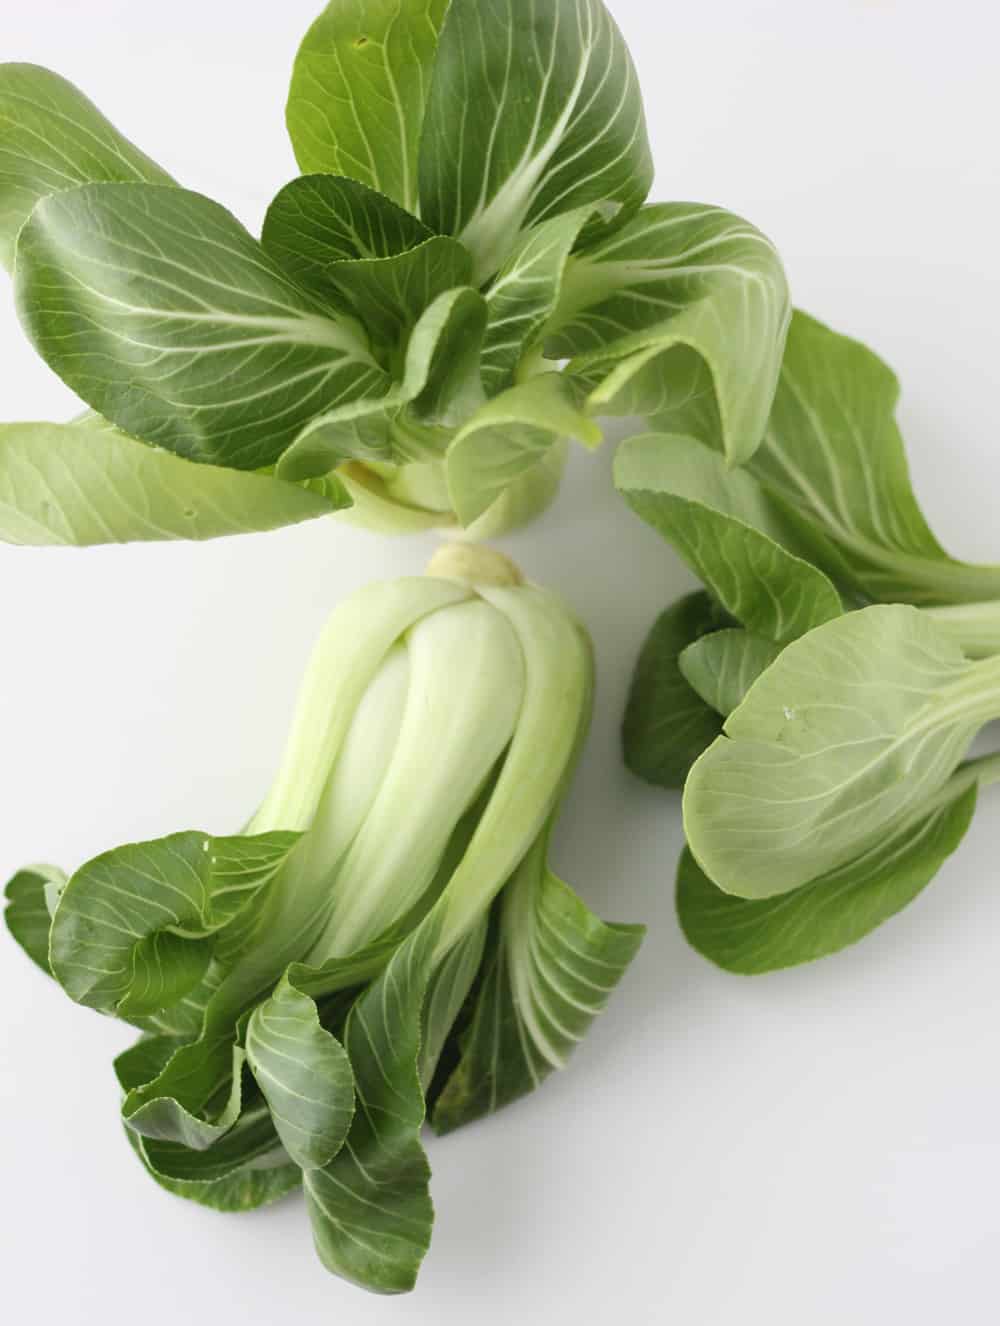 Veggies All Year - Baby Bok Choy from Living Well Kitchen